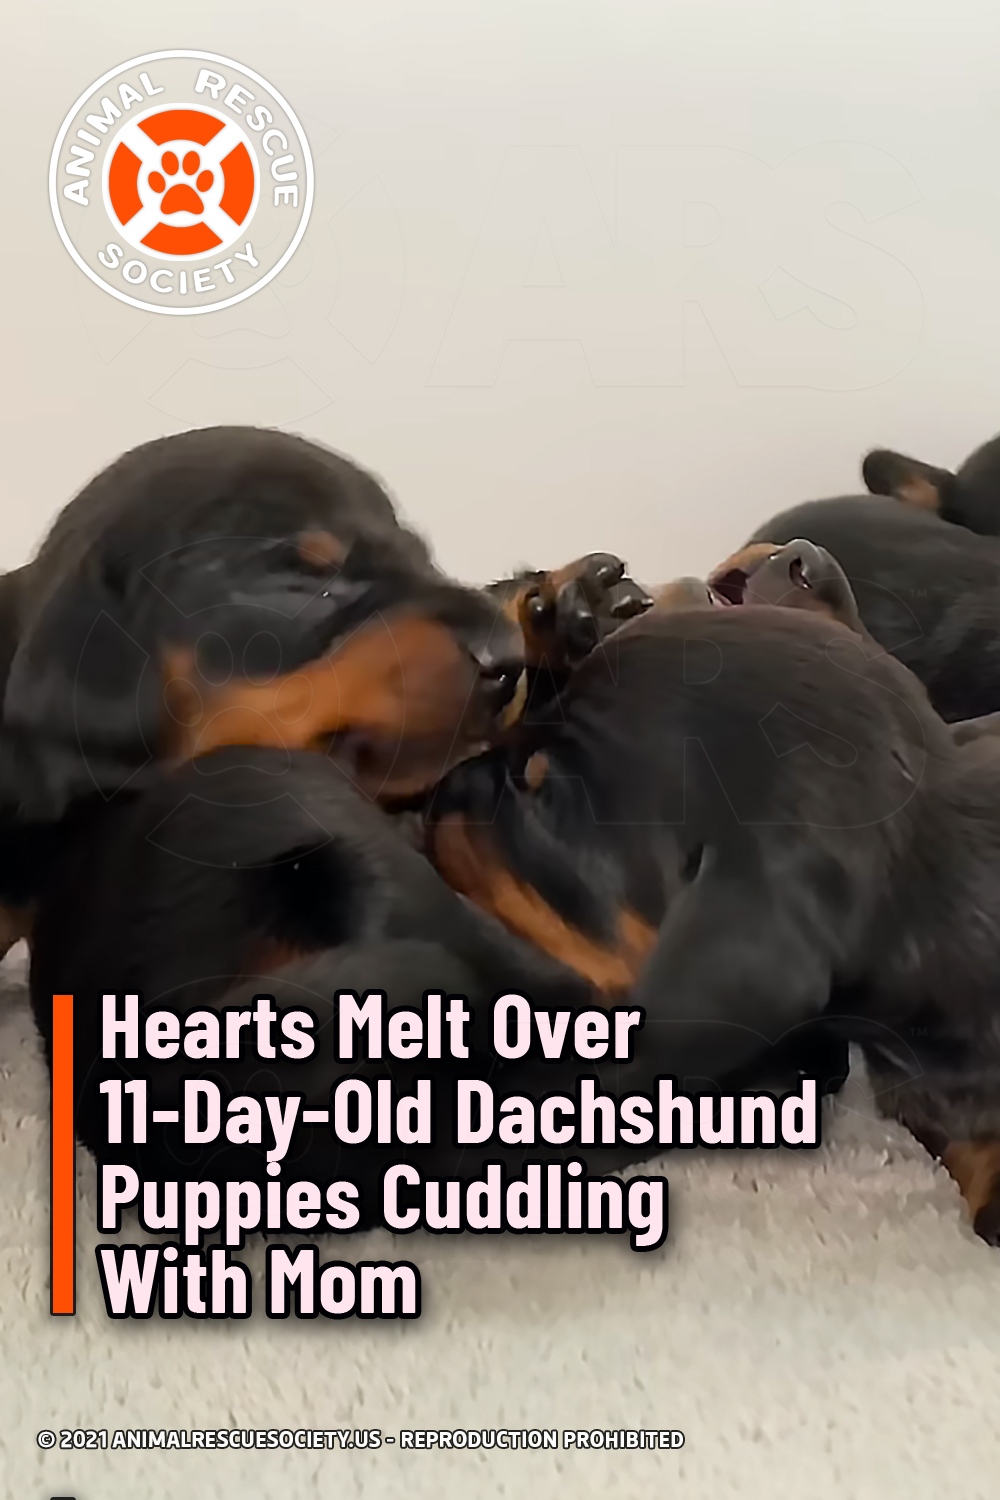 Hearts Melt Over 11-Day-Old Dachshund Puppies Cuddling With Mom